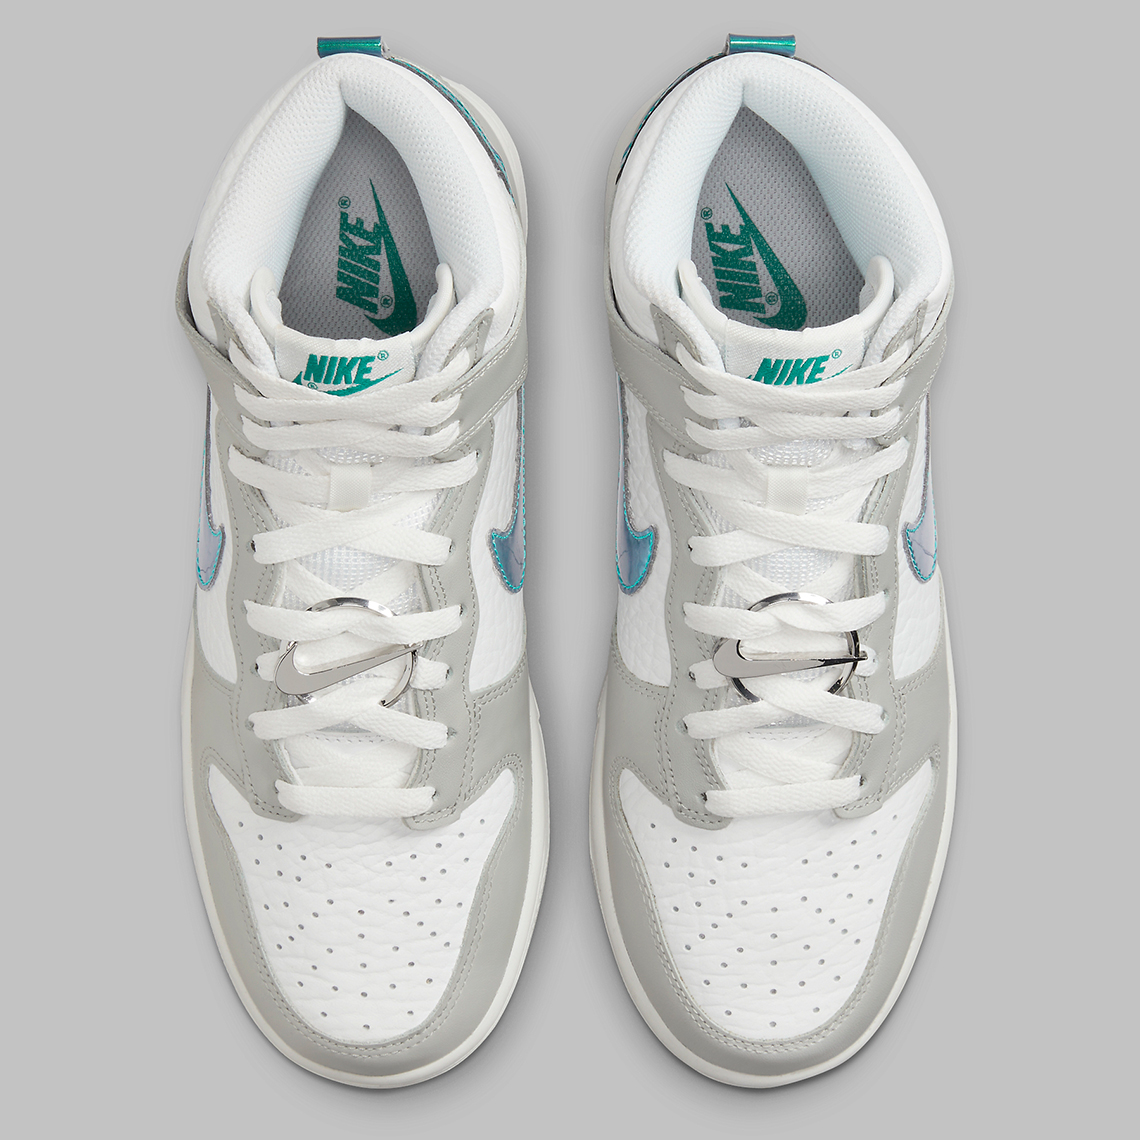 Nike Dunk High White Grey Turquoise Dr7855 100 8